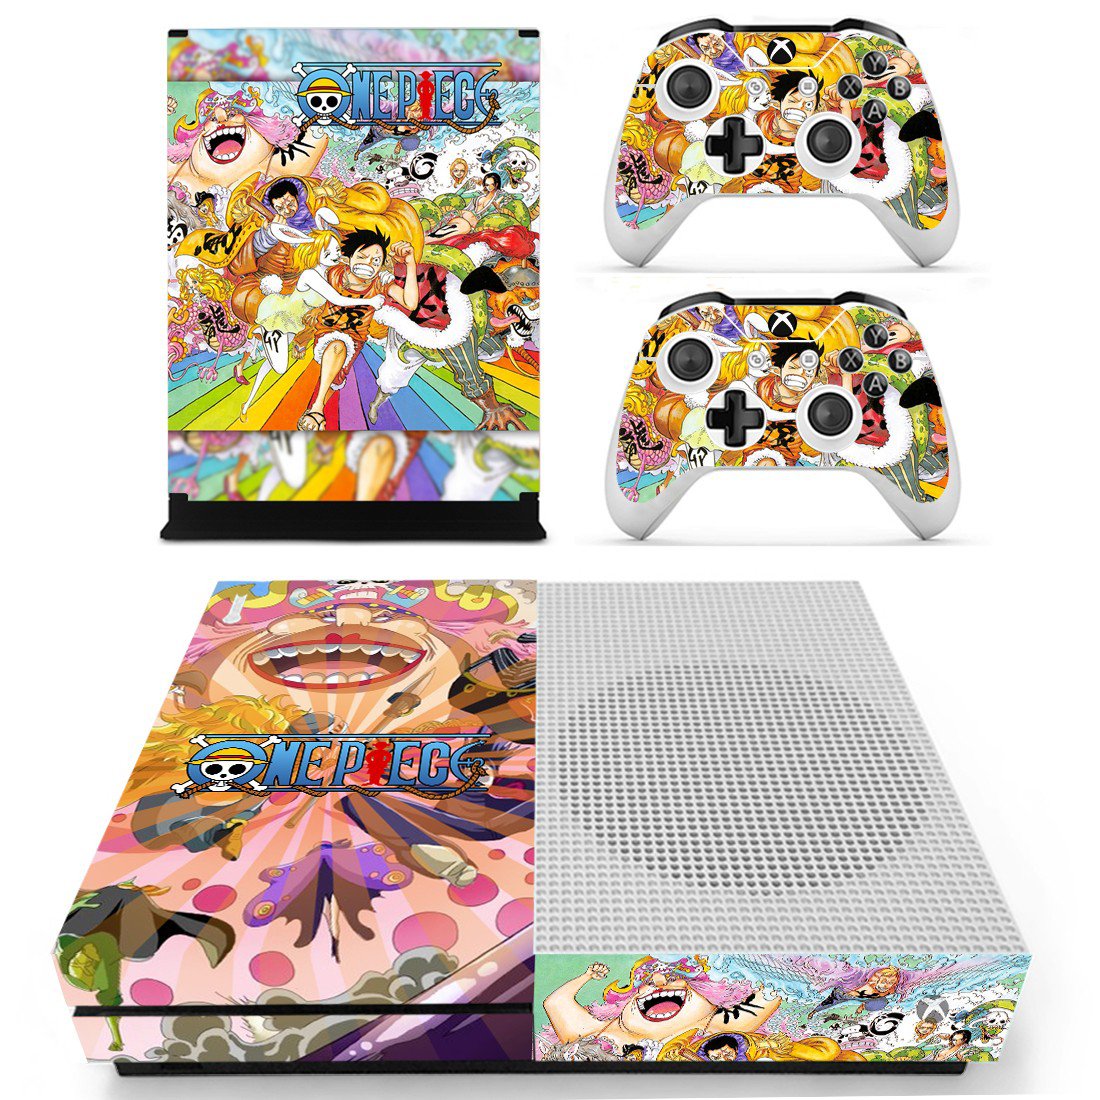 Skin Cover for Xbox One S - One Piece